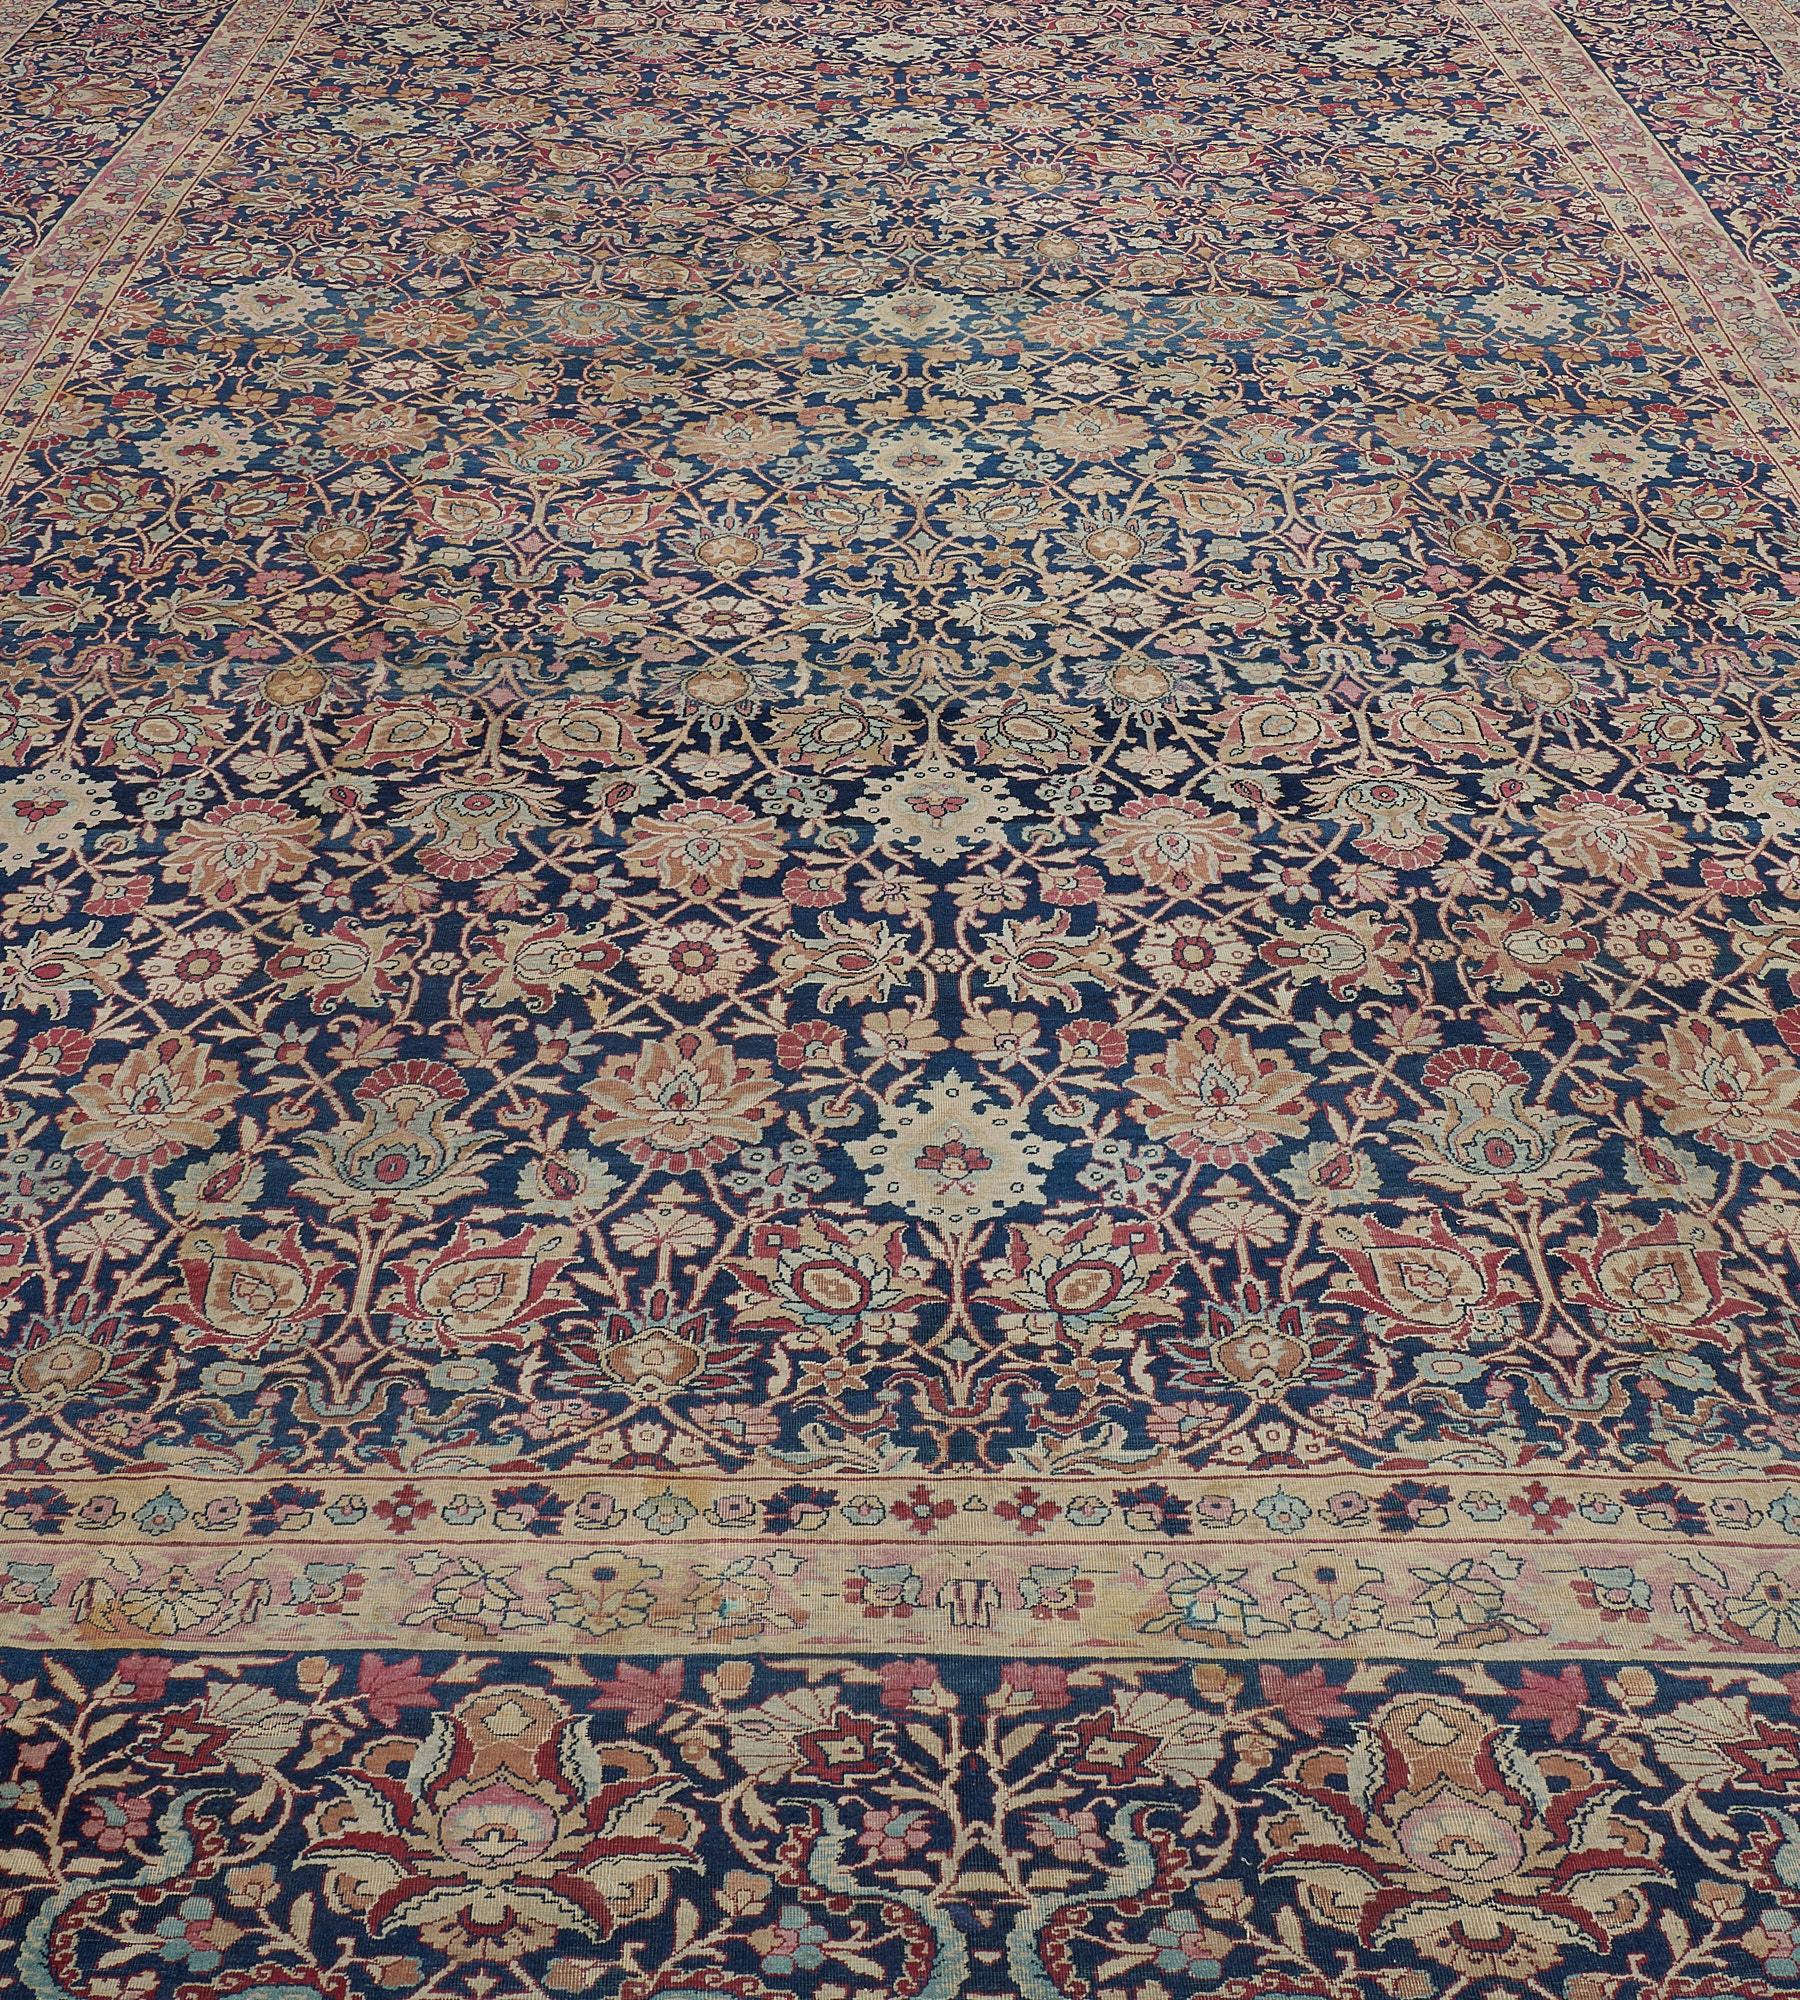 This traditional hand-woven Persian Kerman rug has a deep indigo field of ornate palmettes issuing angled vine forming lozenge lattice, in a majestic indigo border of bold palmettes issuing detailed floral pattern, between magnificent ivory vine